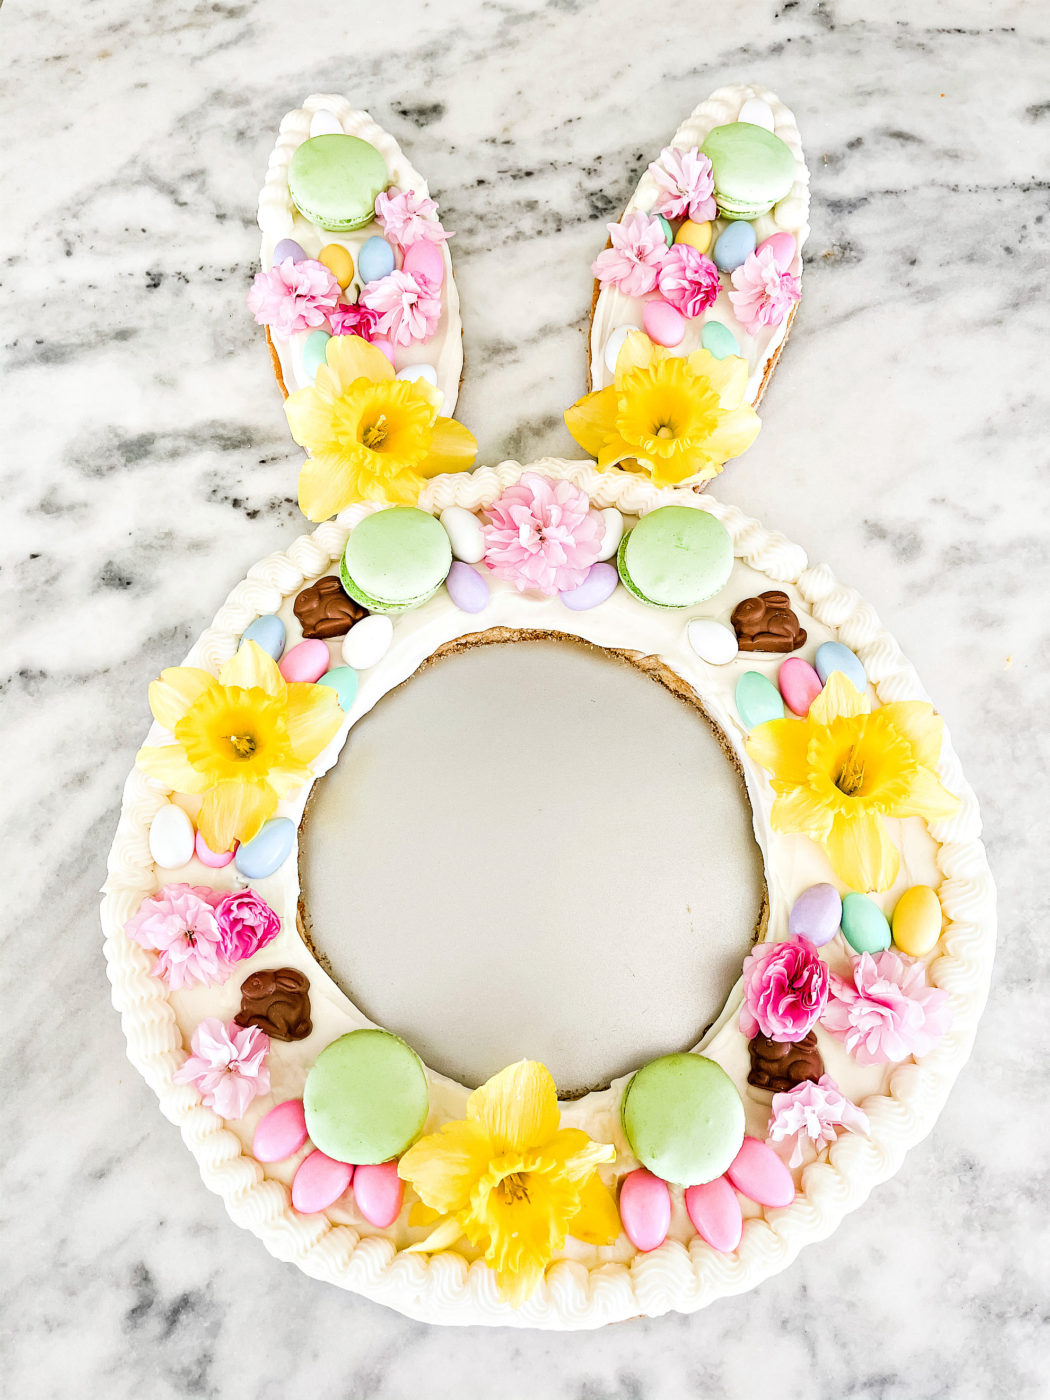 Easter Bunny Cookie Pizza